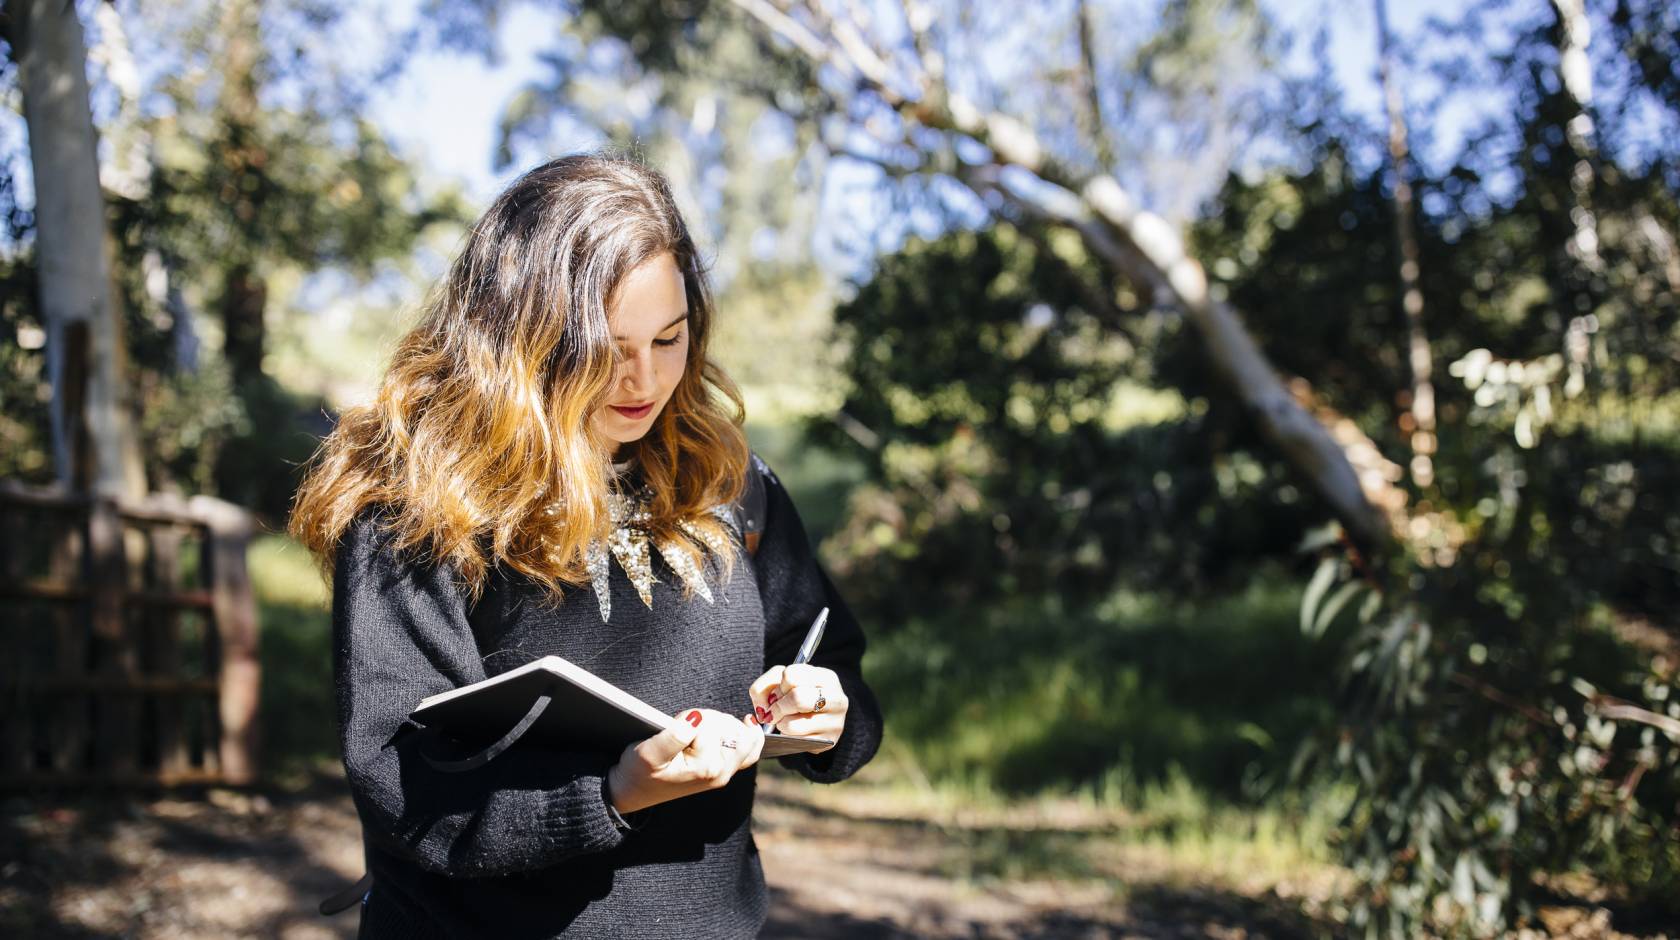 Young woman writing in notebook walking through woods